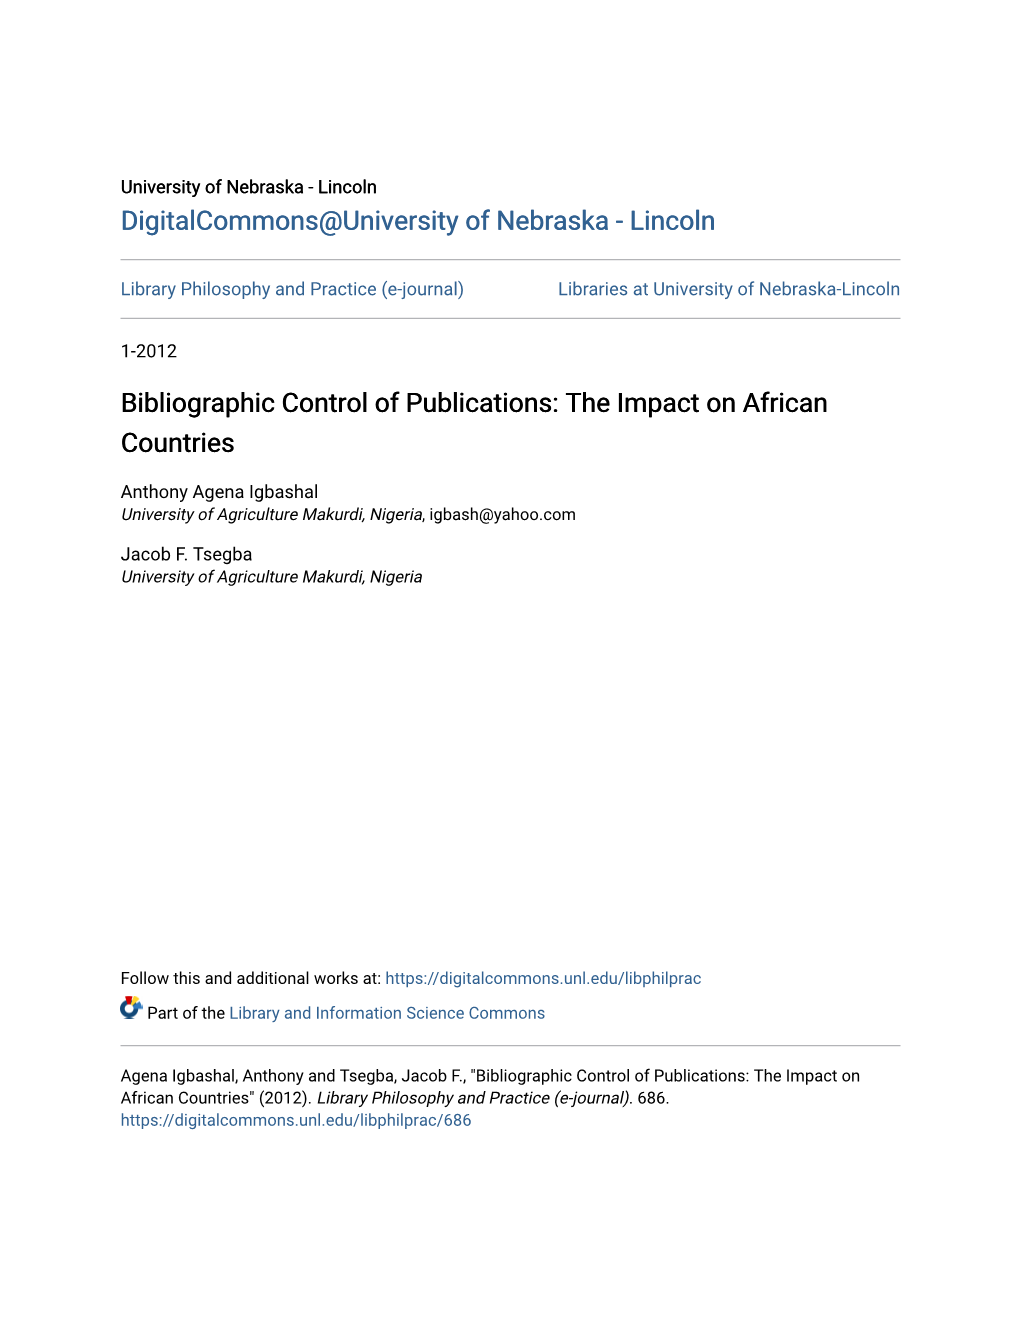 Bibliographic Control of Publications: the Impact on African Countries